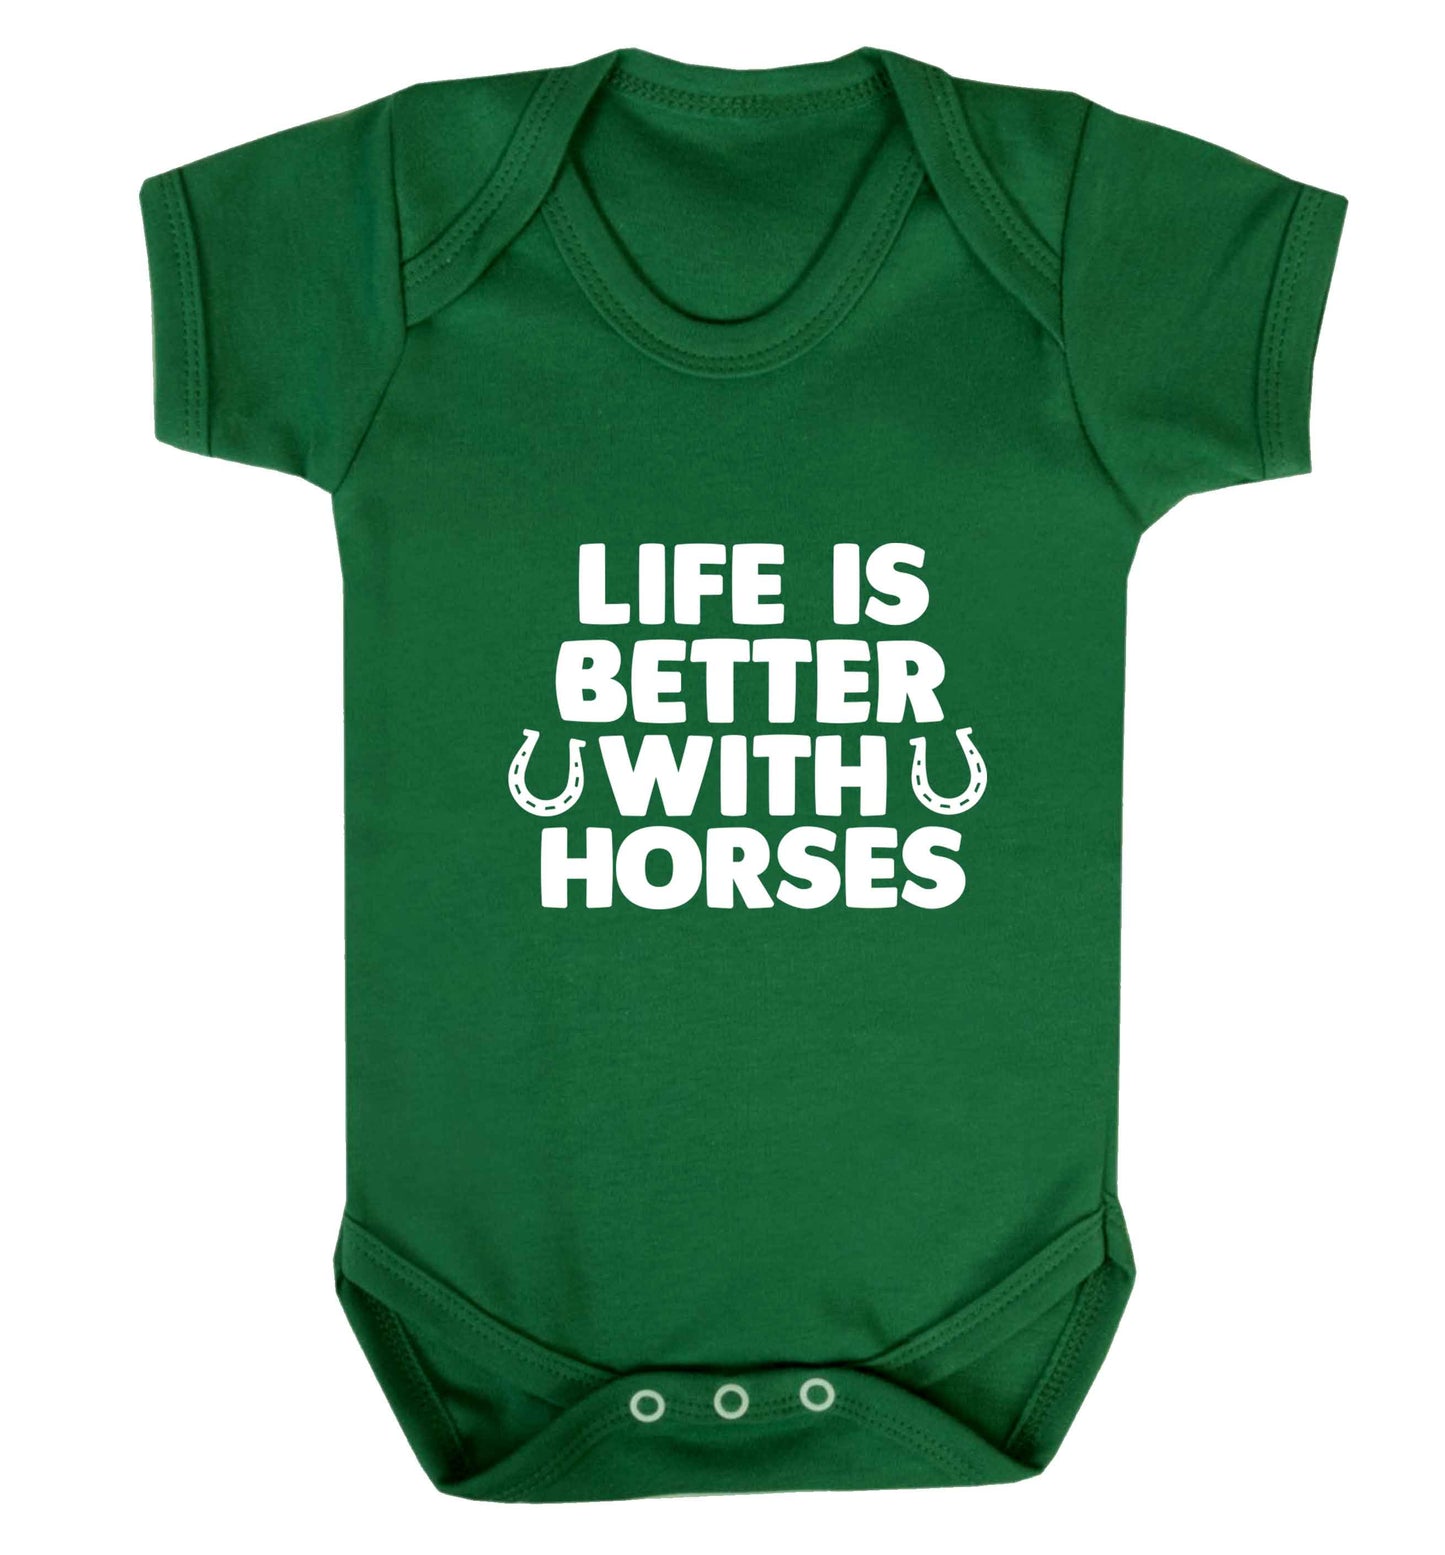 Life is better with horses baby vest green 18-24 months